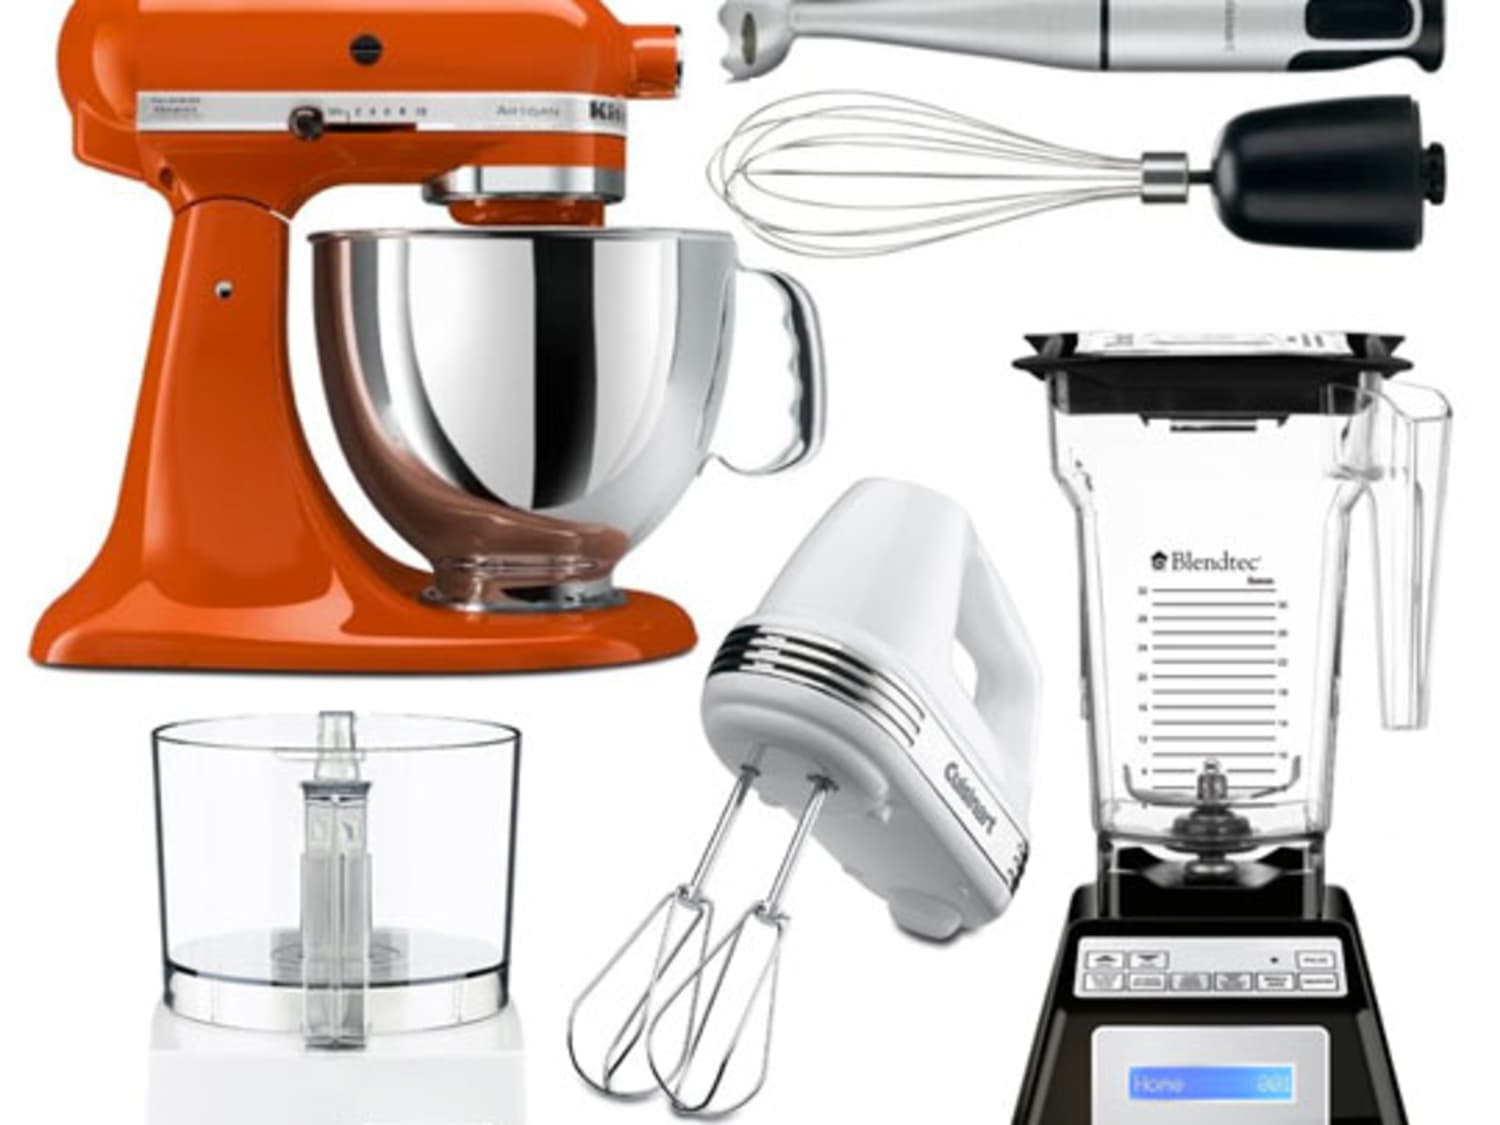 Stellisons Electrical  What Are Small Kitchen Appliances? - Stellisons  Electrical Insider Blogs